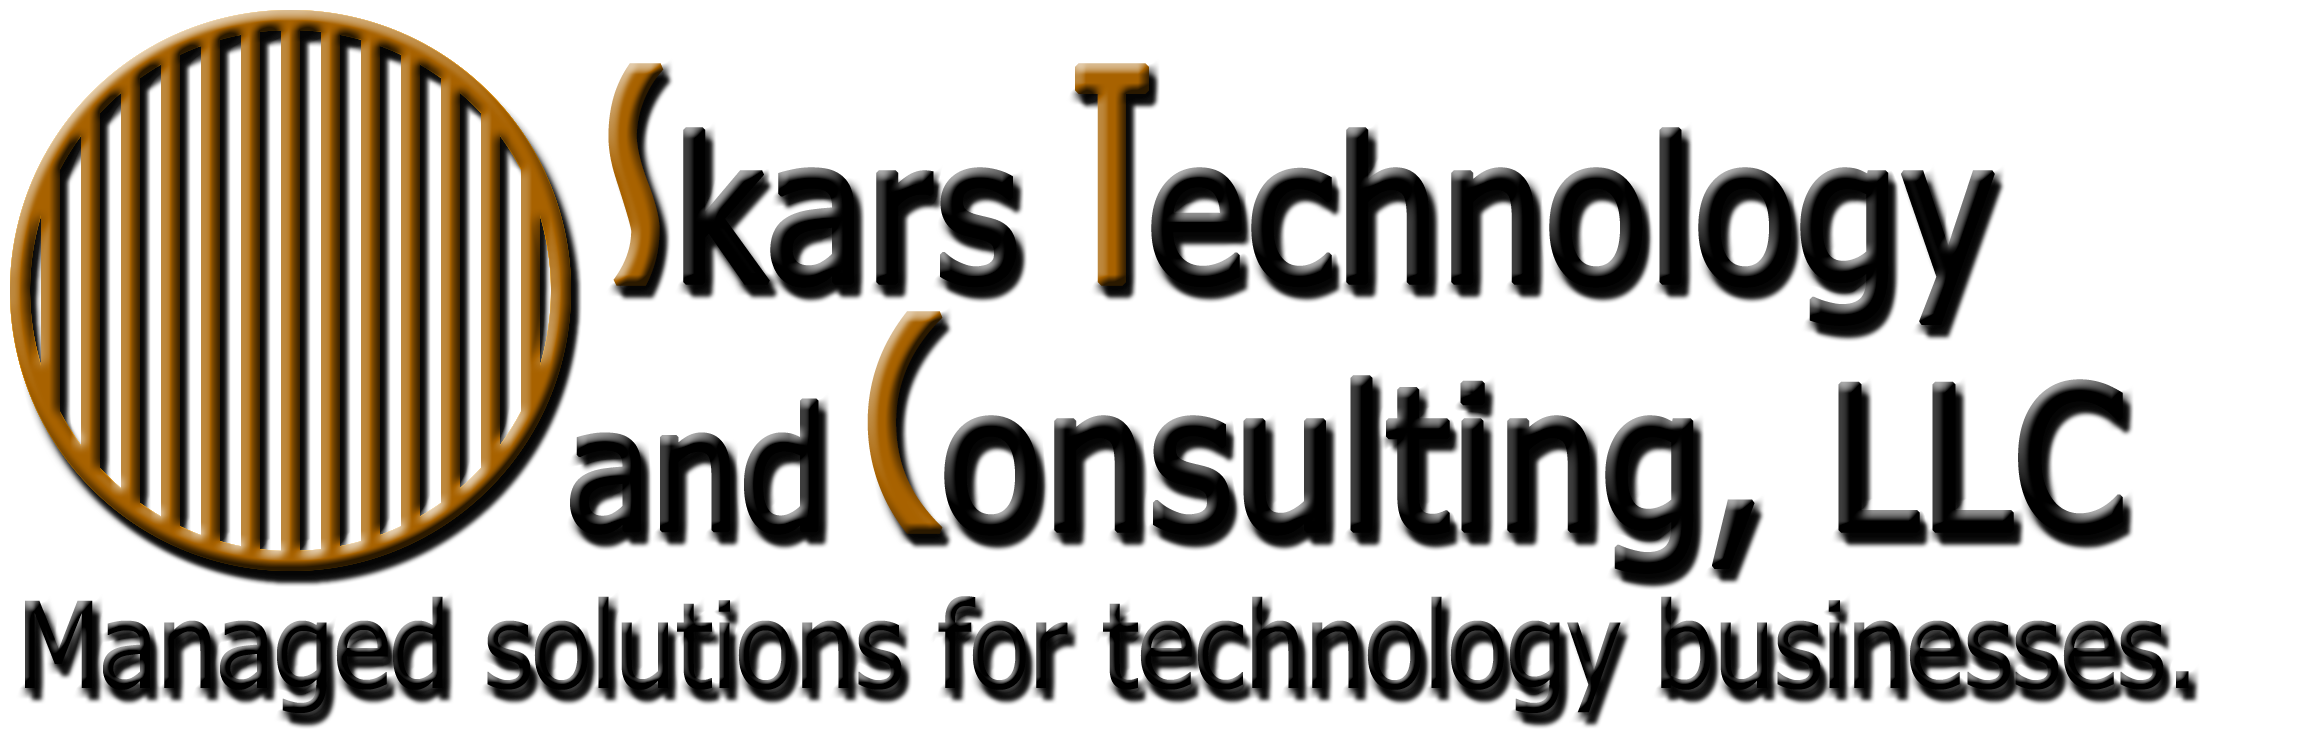 Skars Technology and Consulting, LLC.